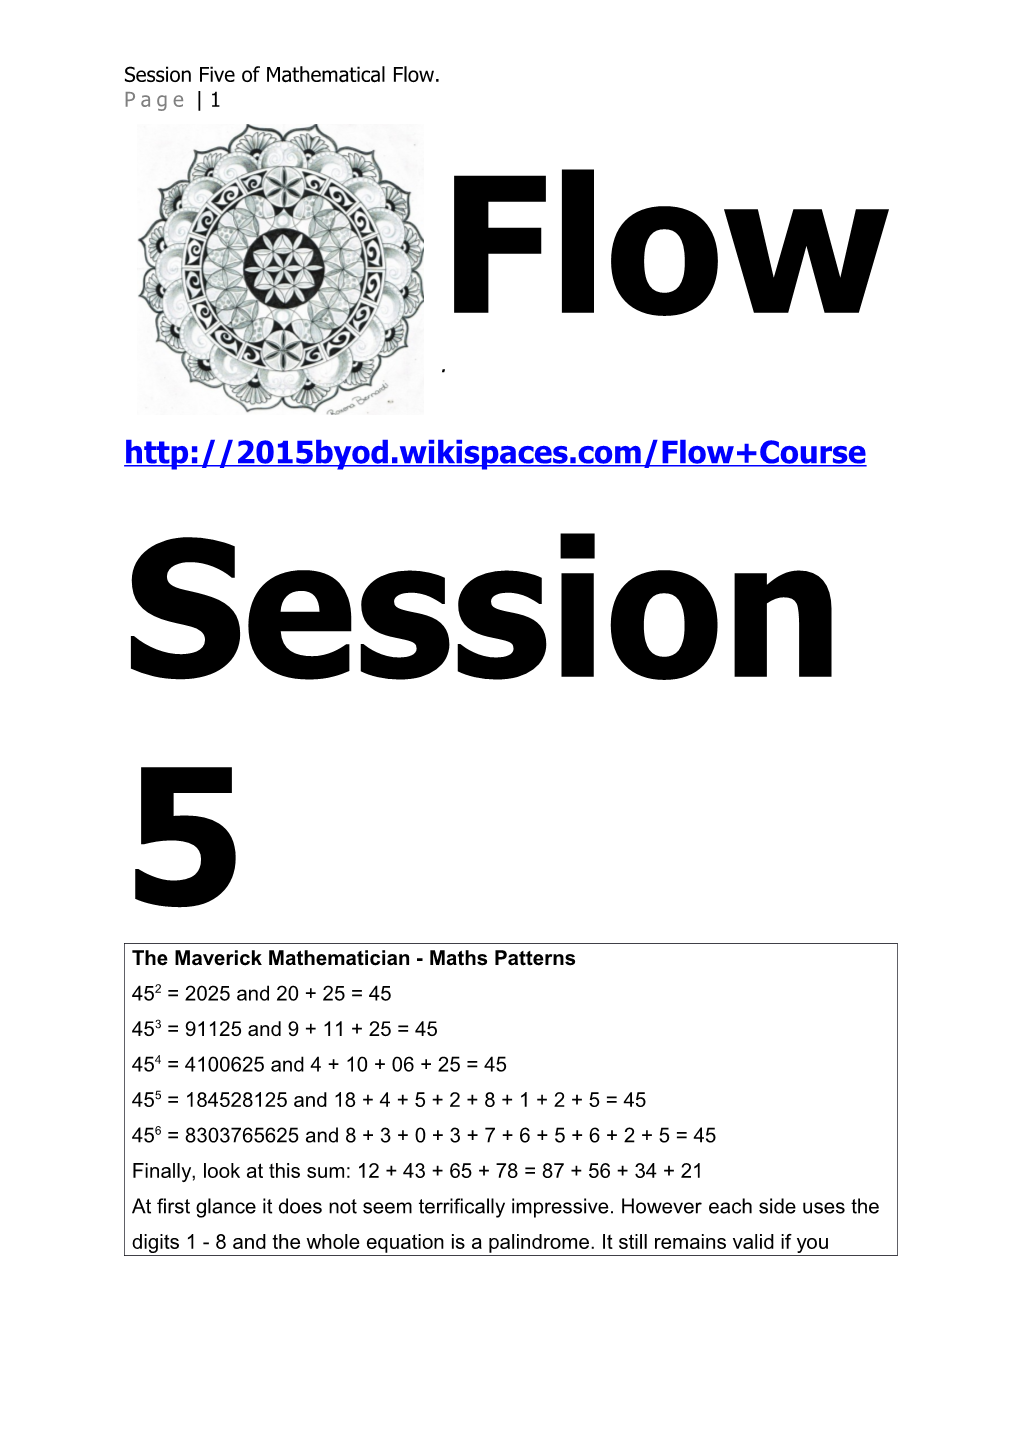 Session Five of Mathematical Flow. Page 1